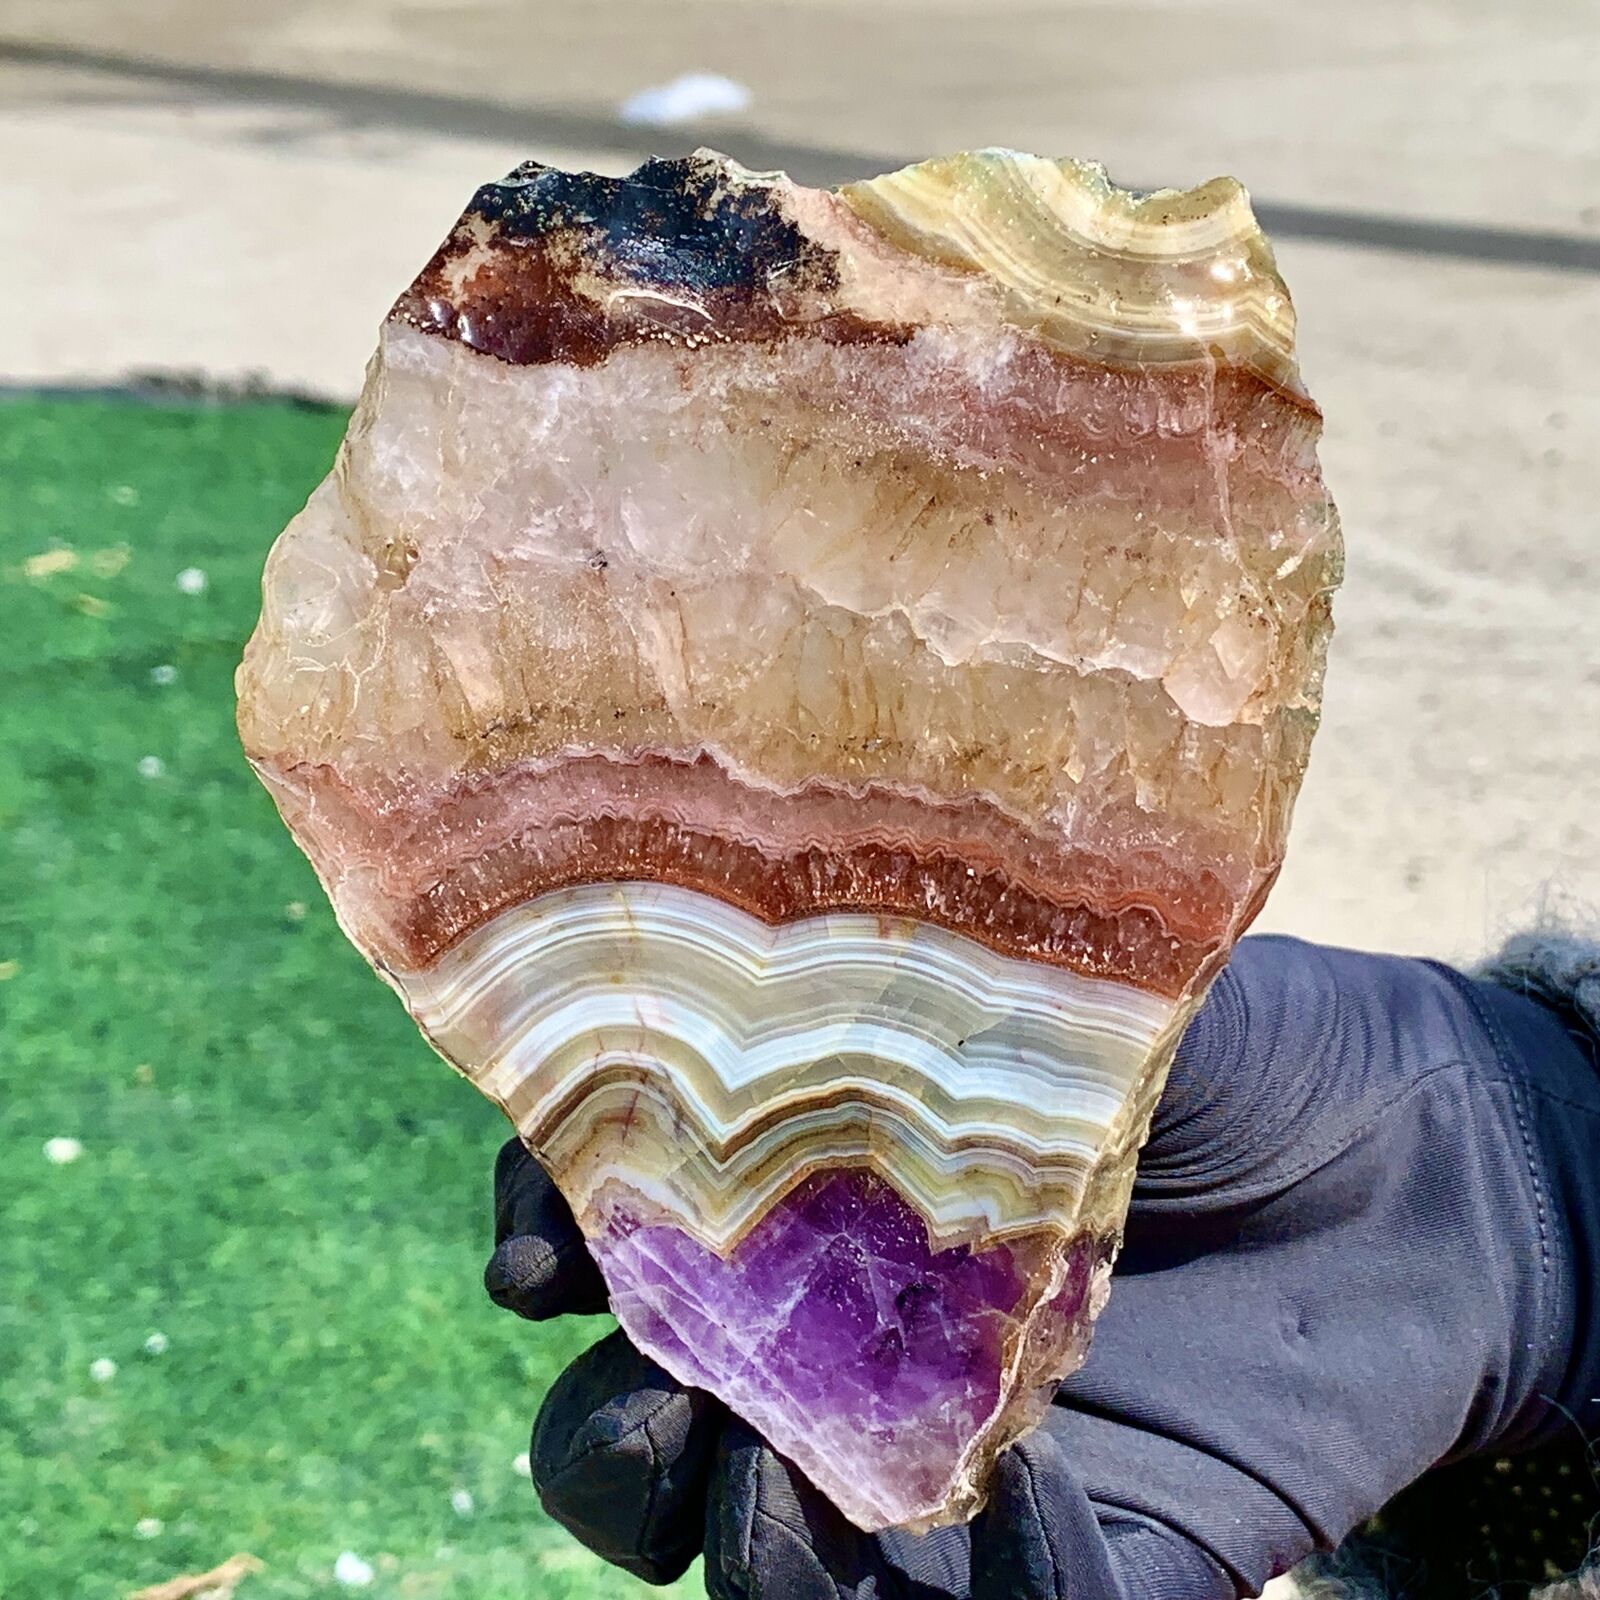 202G Natural and beautiful dreamy amethyst rough stone specimen